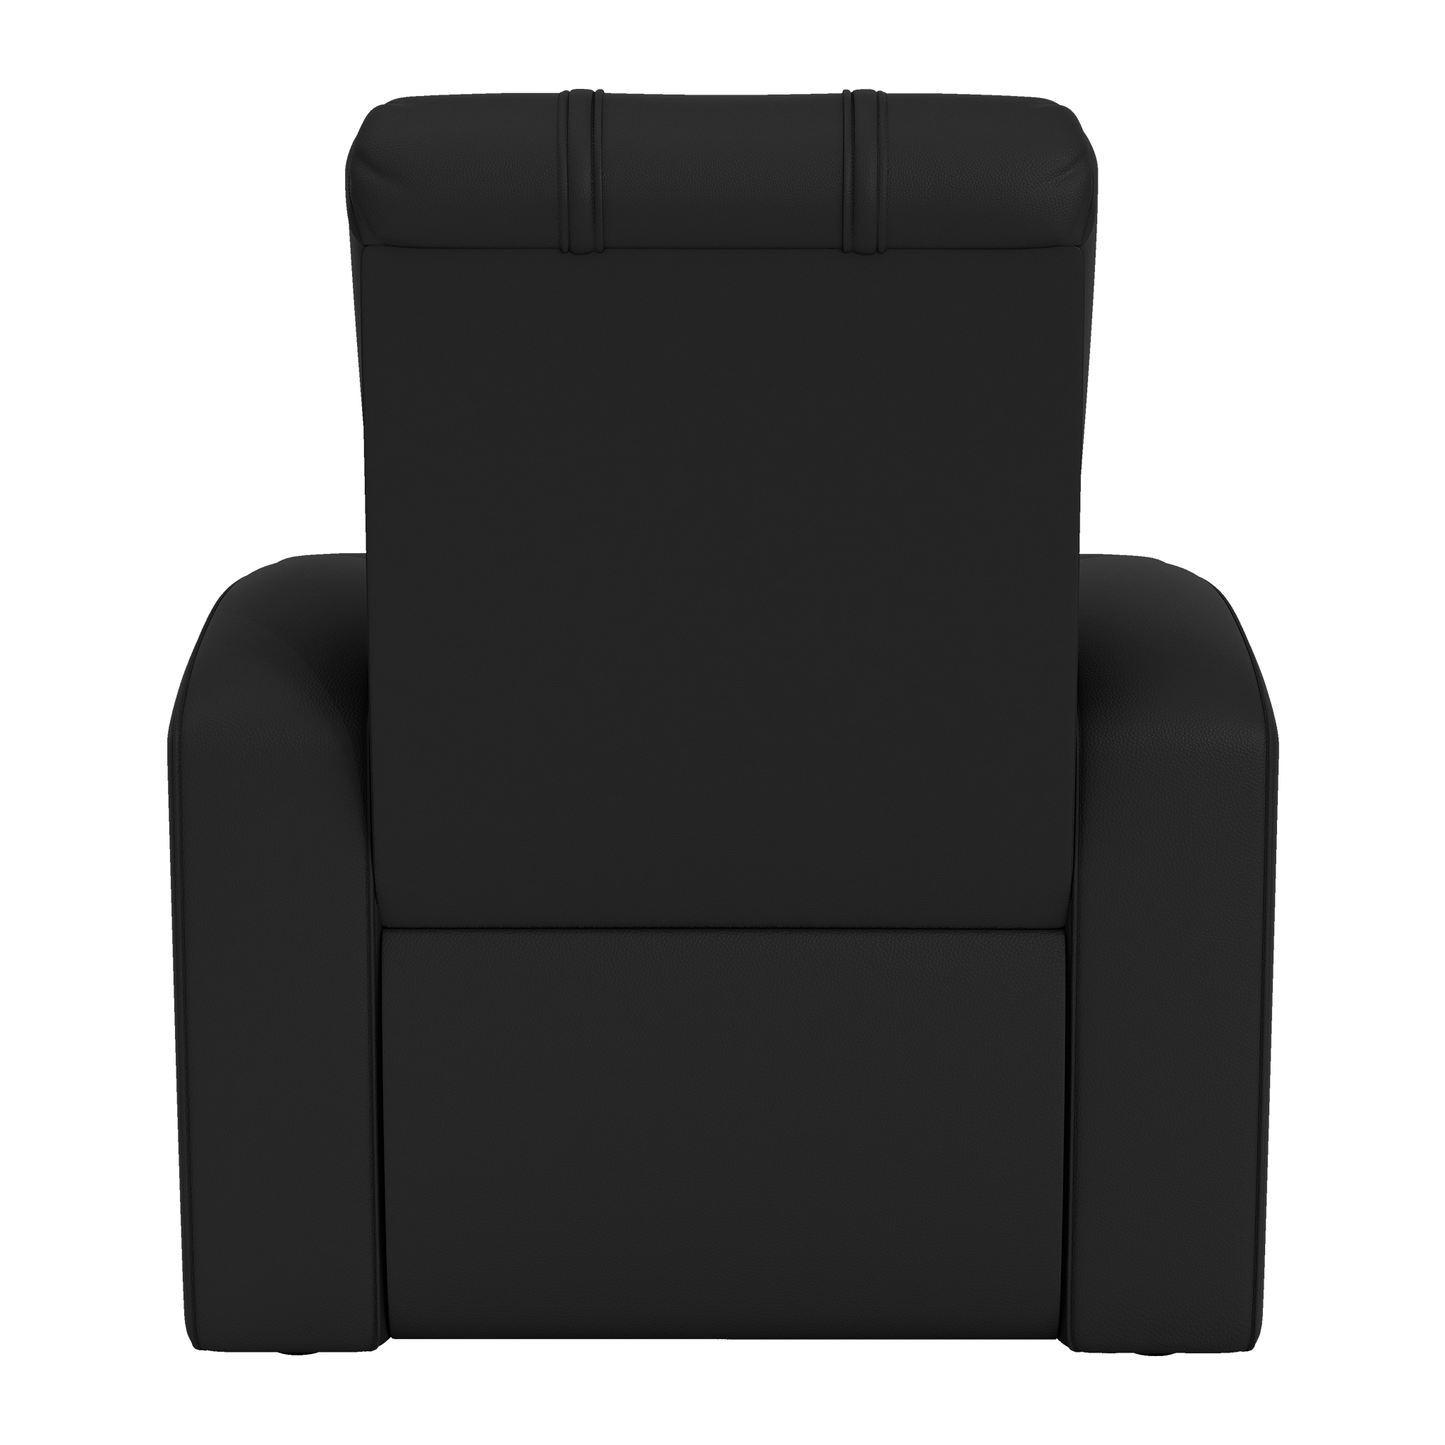 Relax Home Theater Recliner with Home Run Swing Logo Panel